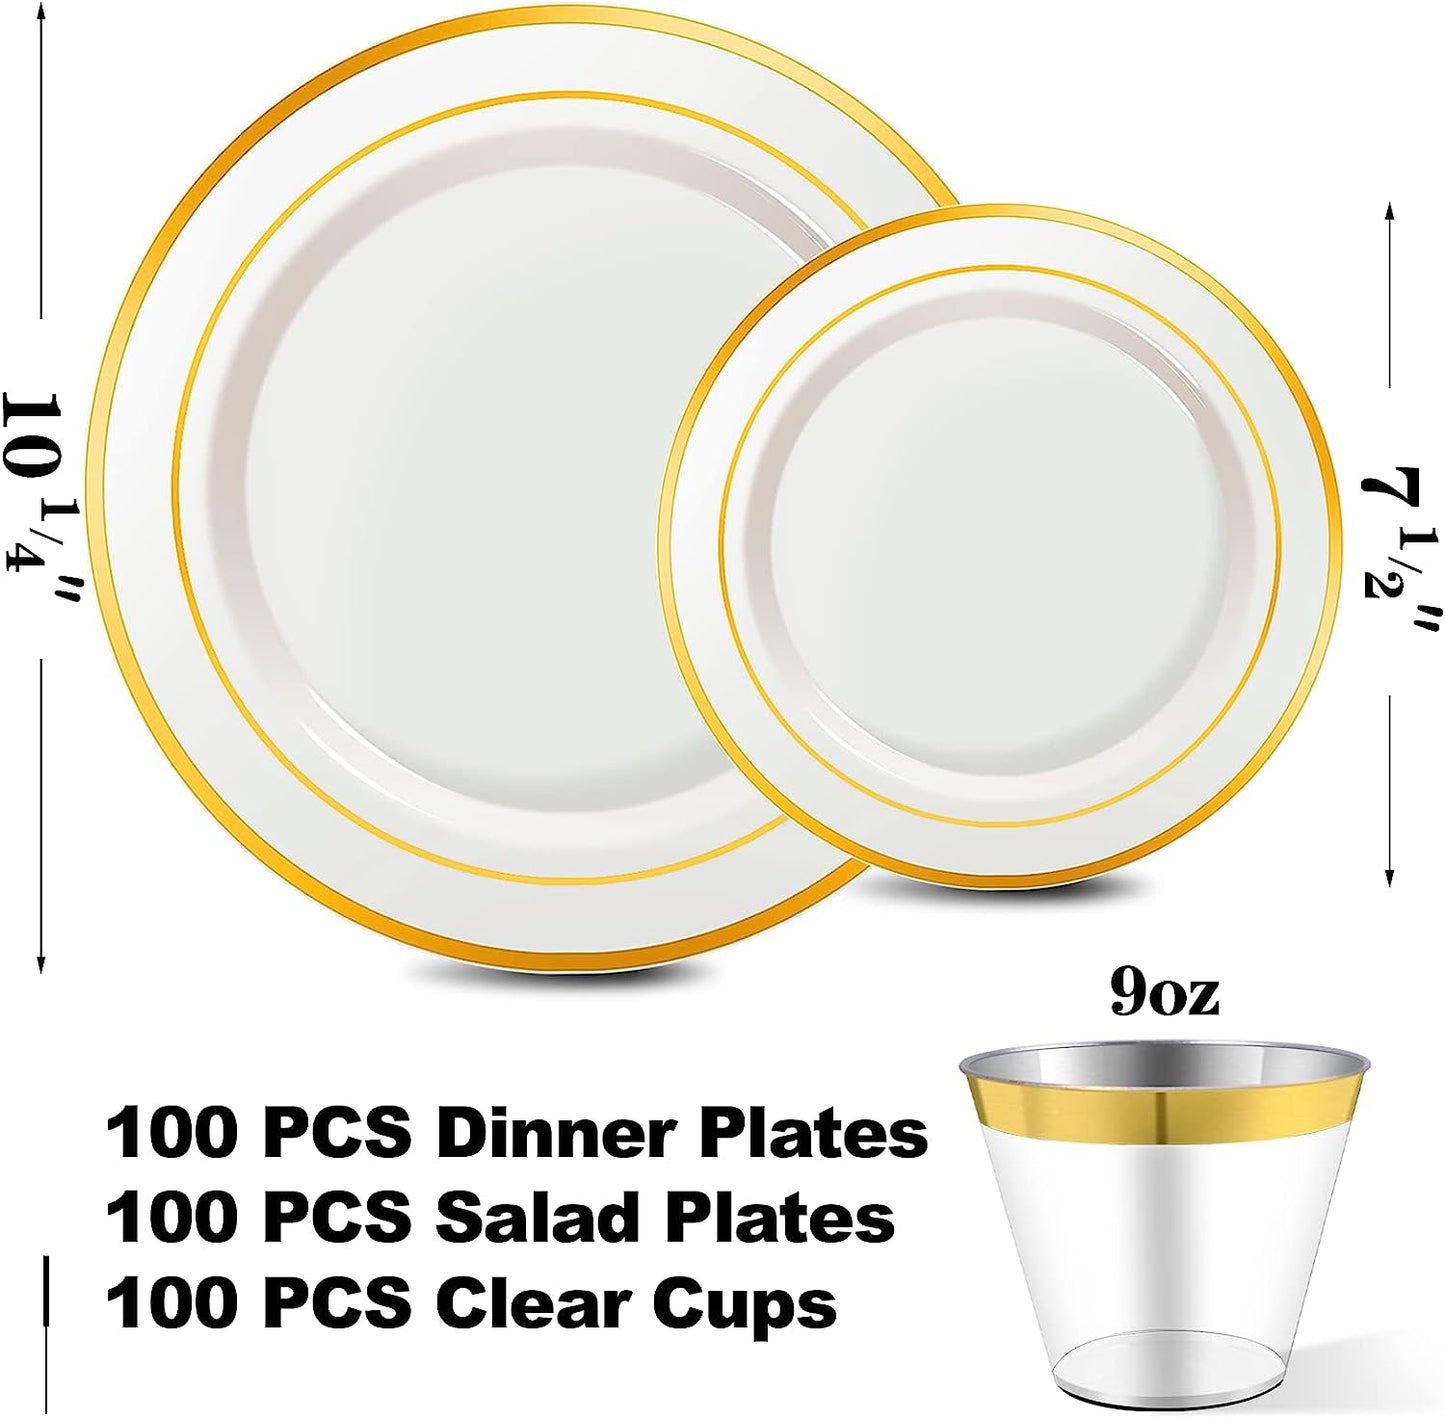 600 Pieces Gold Disposable Plates for 100 Guests, Plastic Plates for Party, Wedding, Dinnerware Set of 100 Dinner Plates, 100 Salad Plates, 100 Spoons, 100 Forks, 100 Knives, 100 Cups